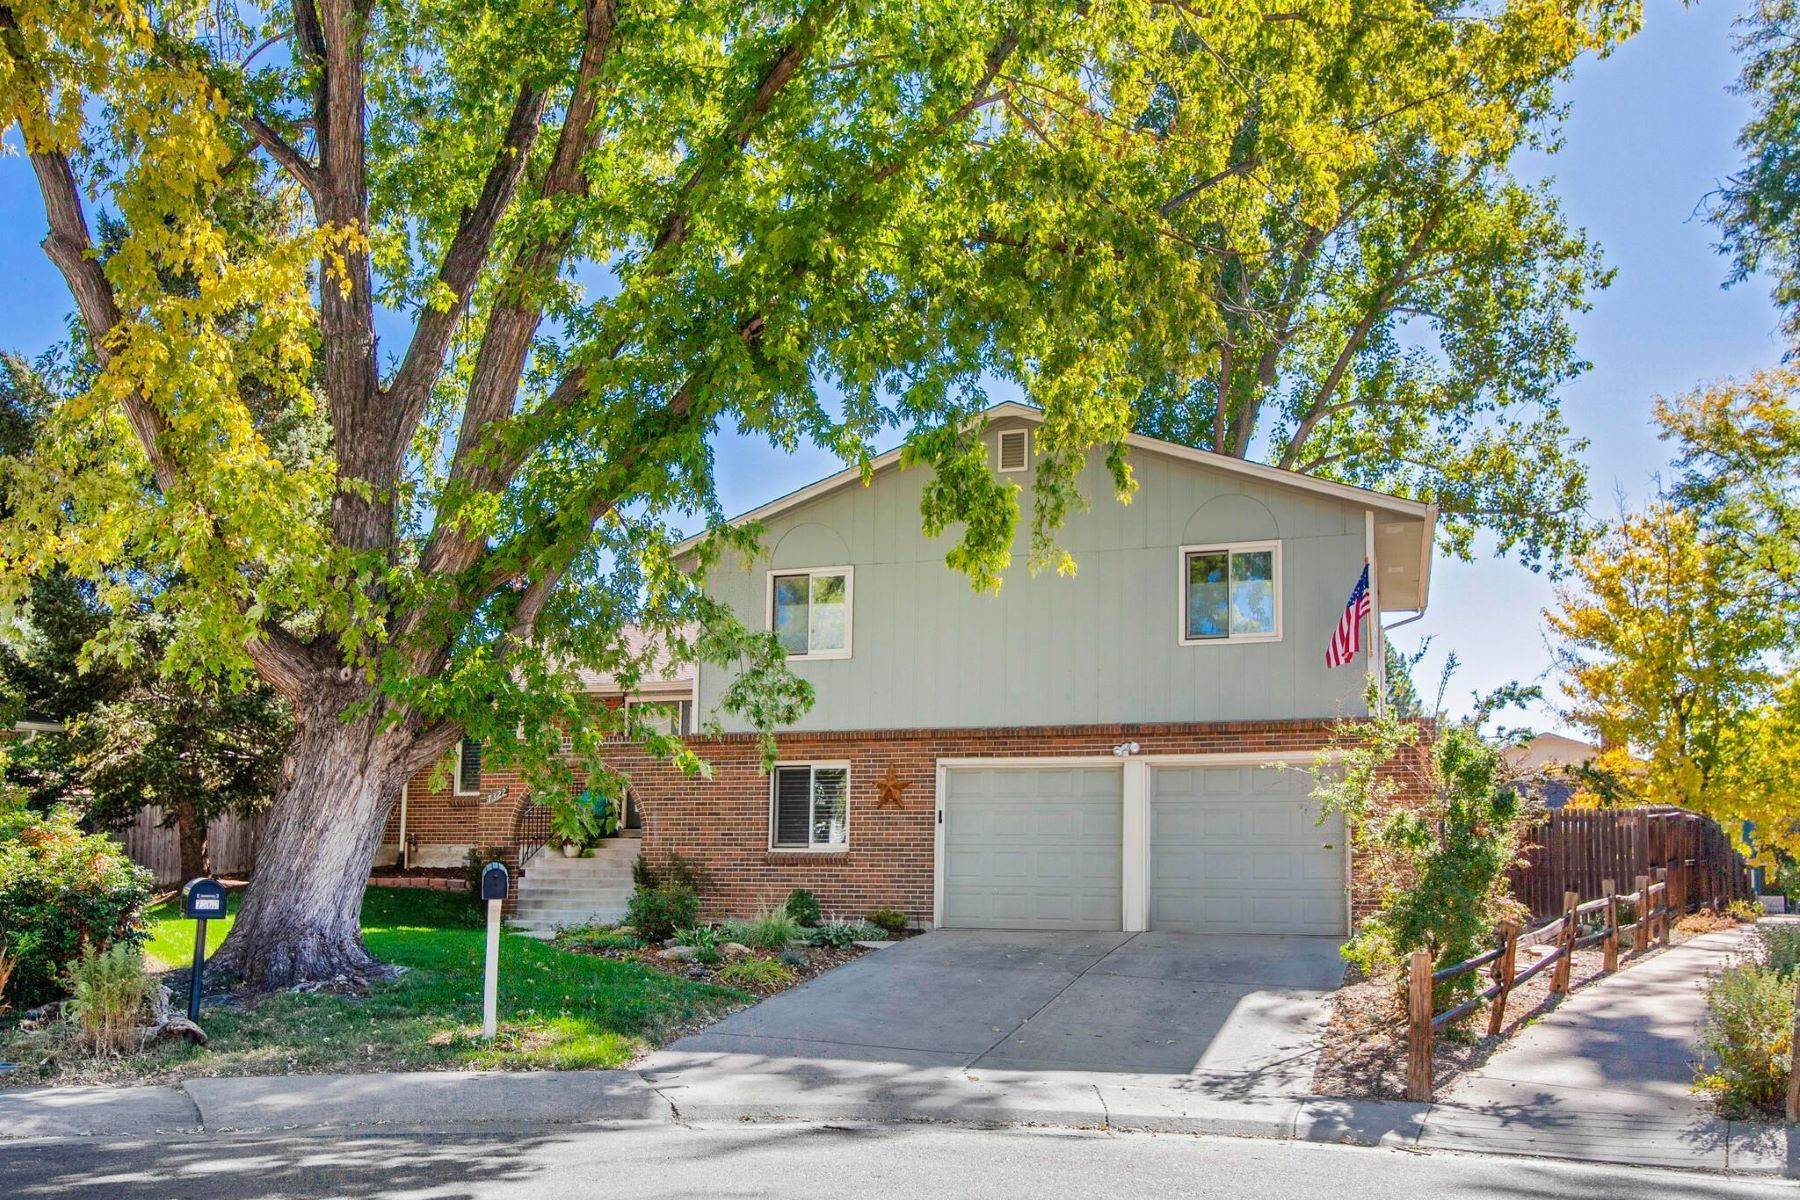 2. Single Family Homes for Active at This Charming Four Bedroom, Three Bathroom Home is a True Arvada Gem! 7322 West 82nd Way Arvada, Colorado 80003 United States